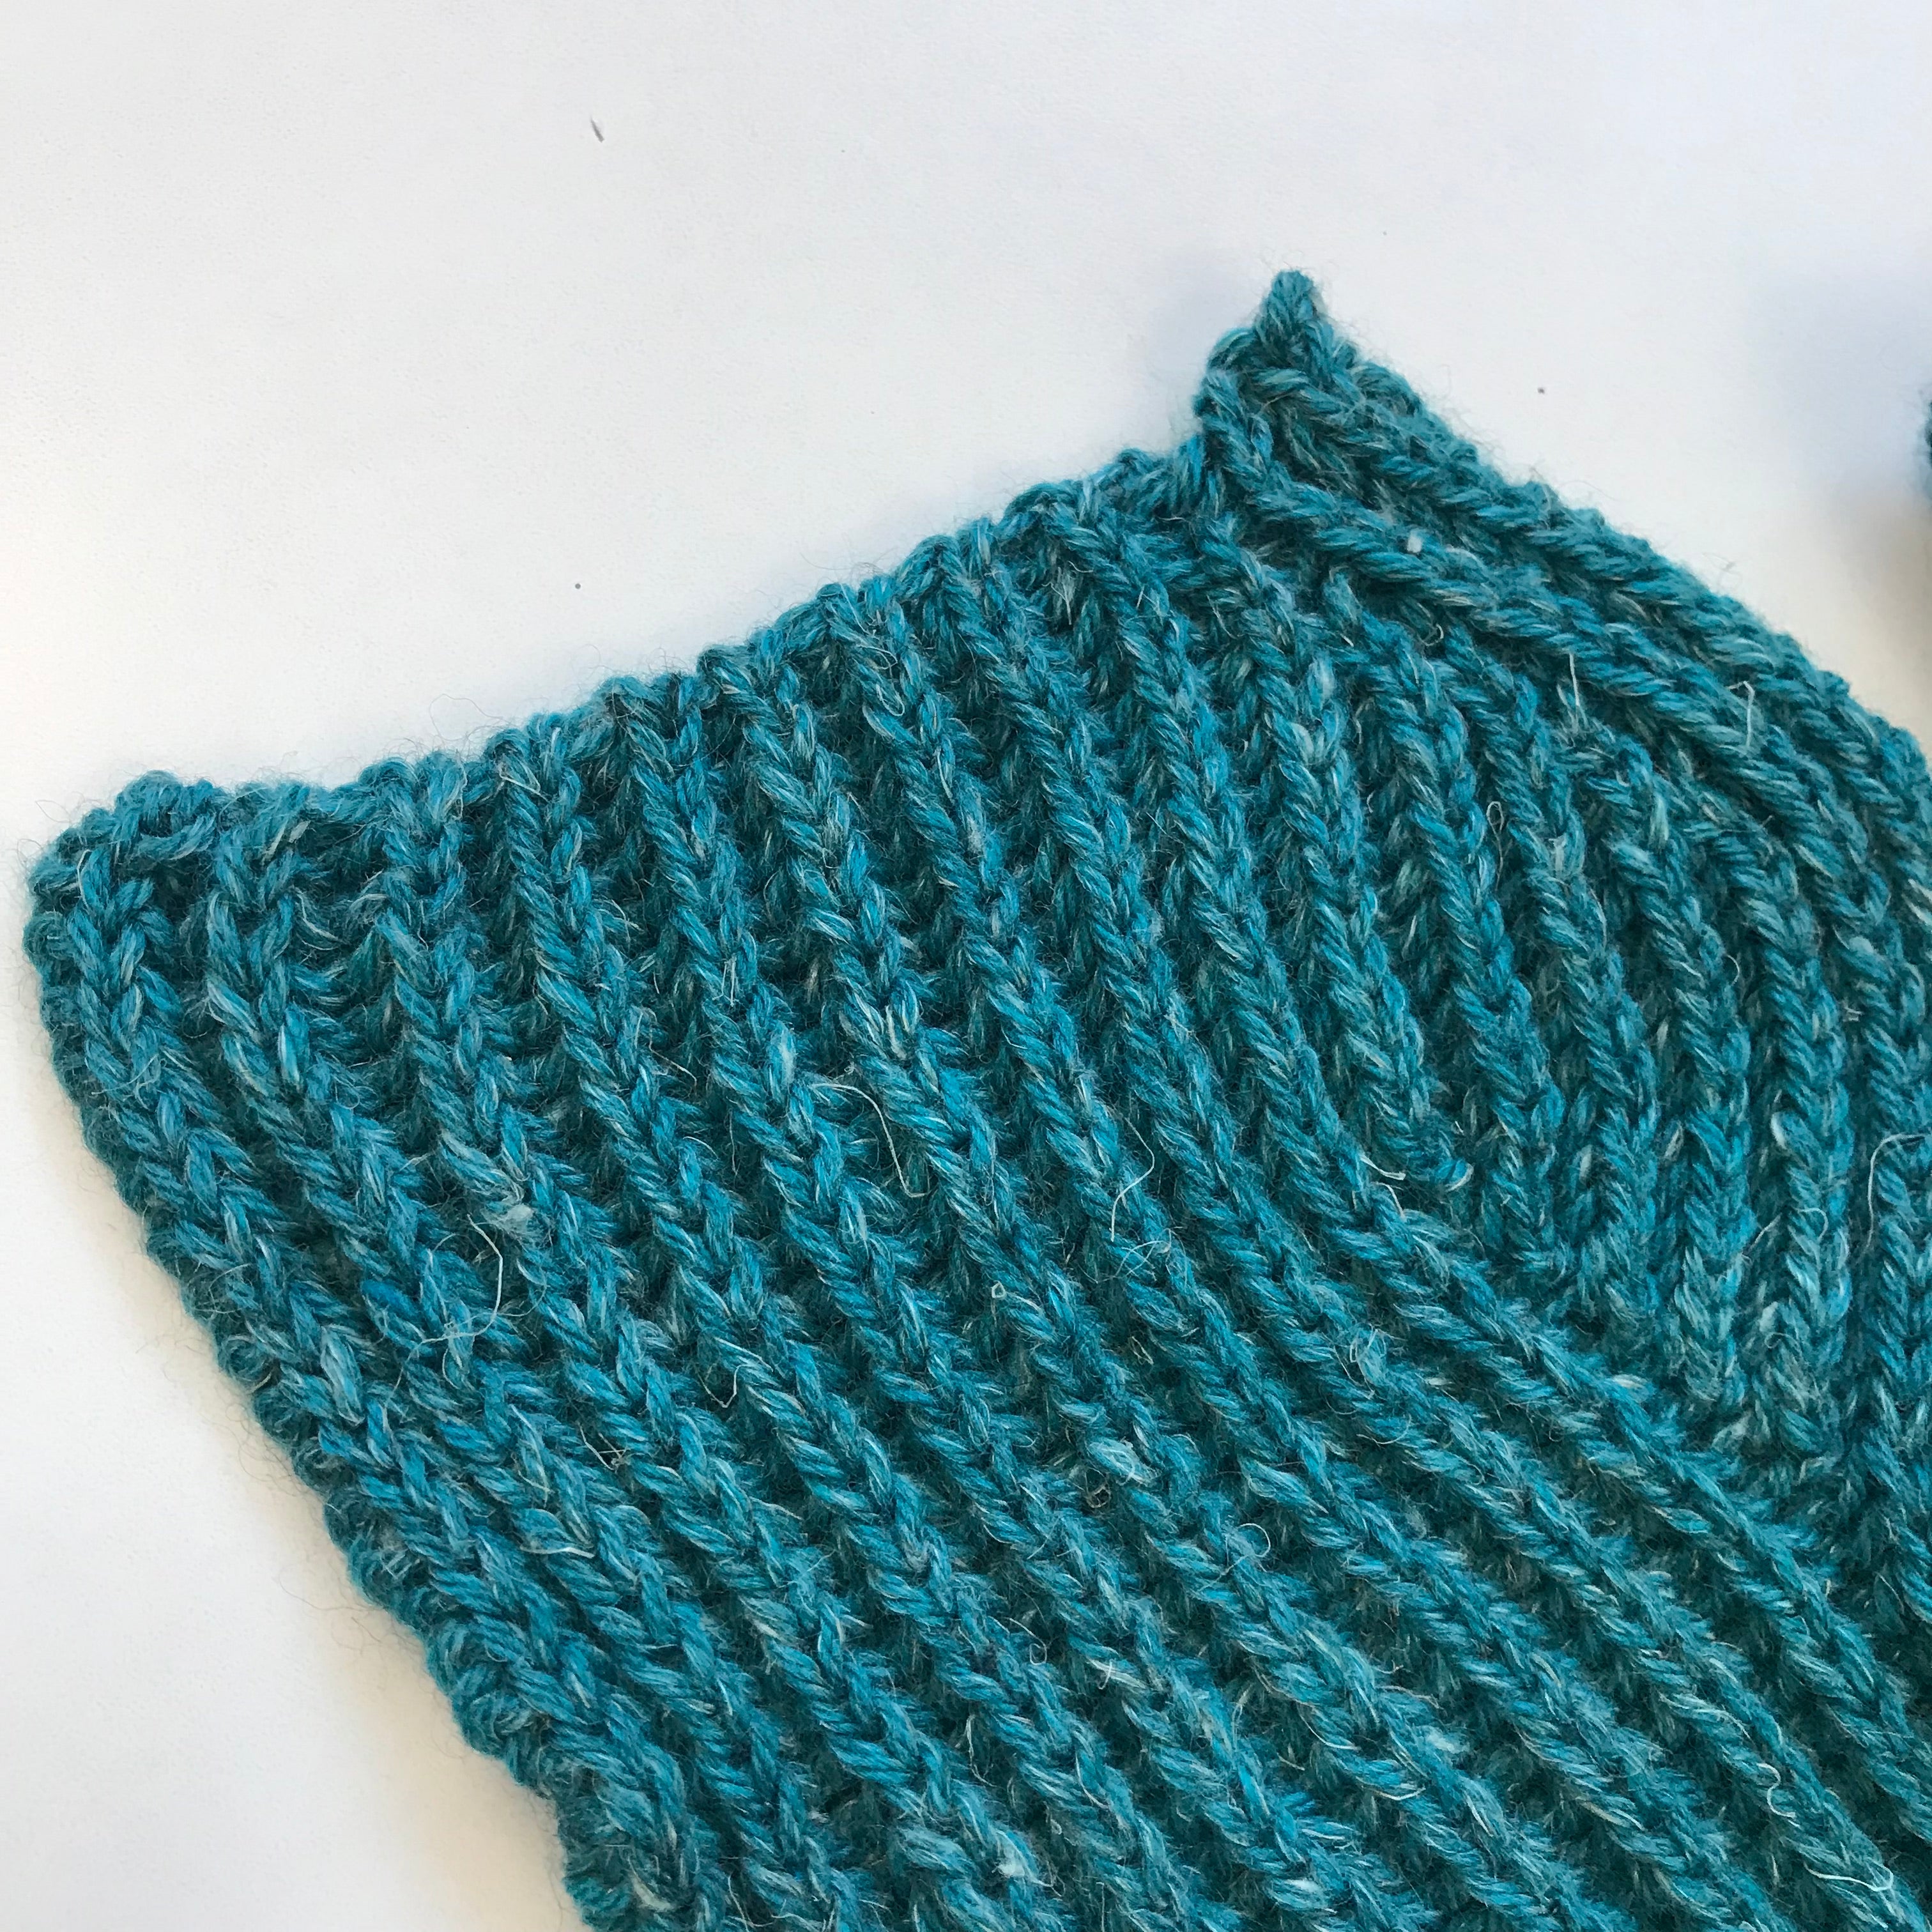 How to knit the 2x2 rib stitch - Detailed tutorial for beginners [+video]